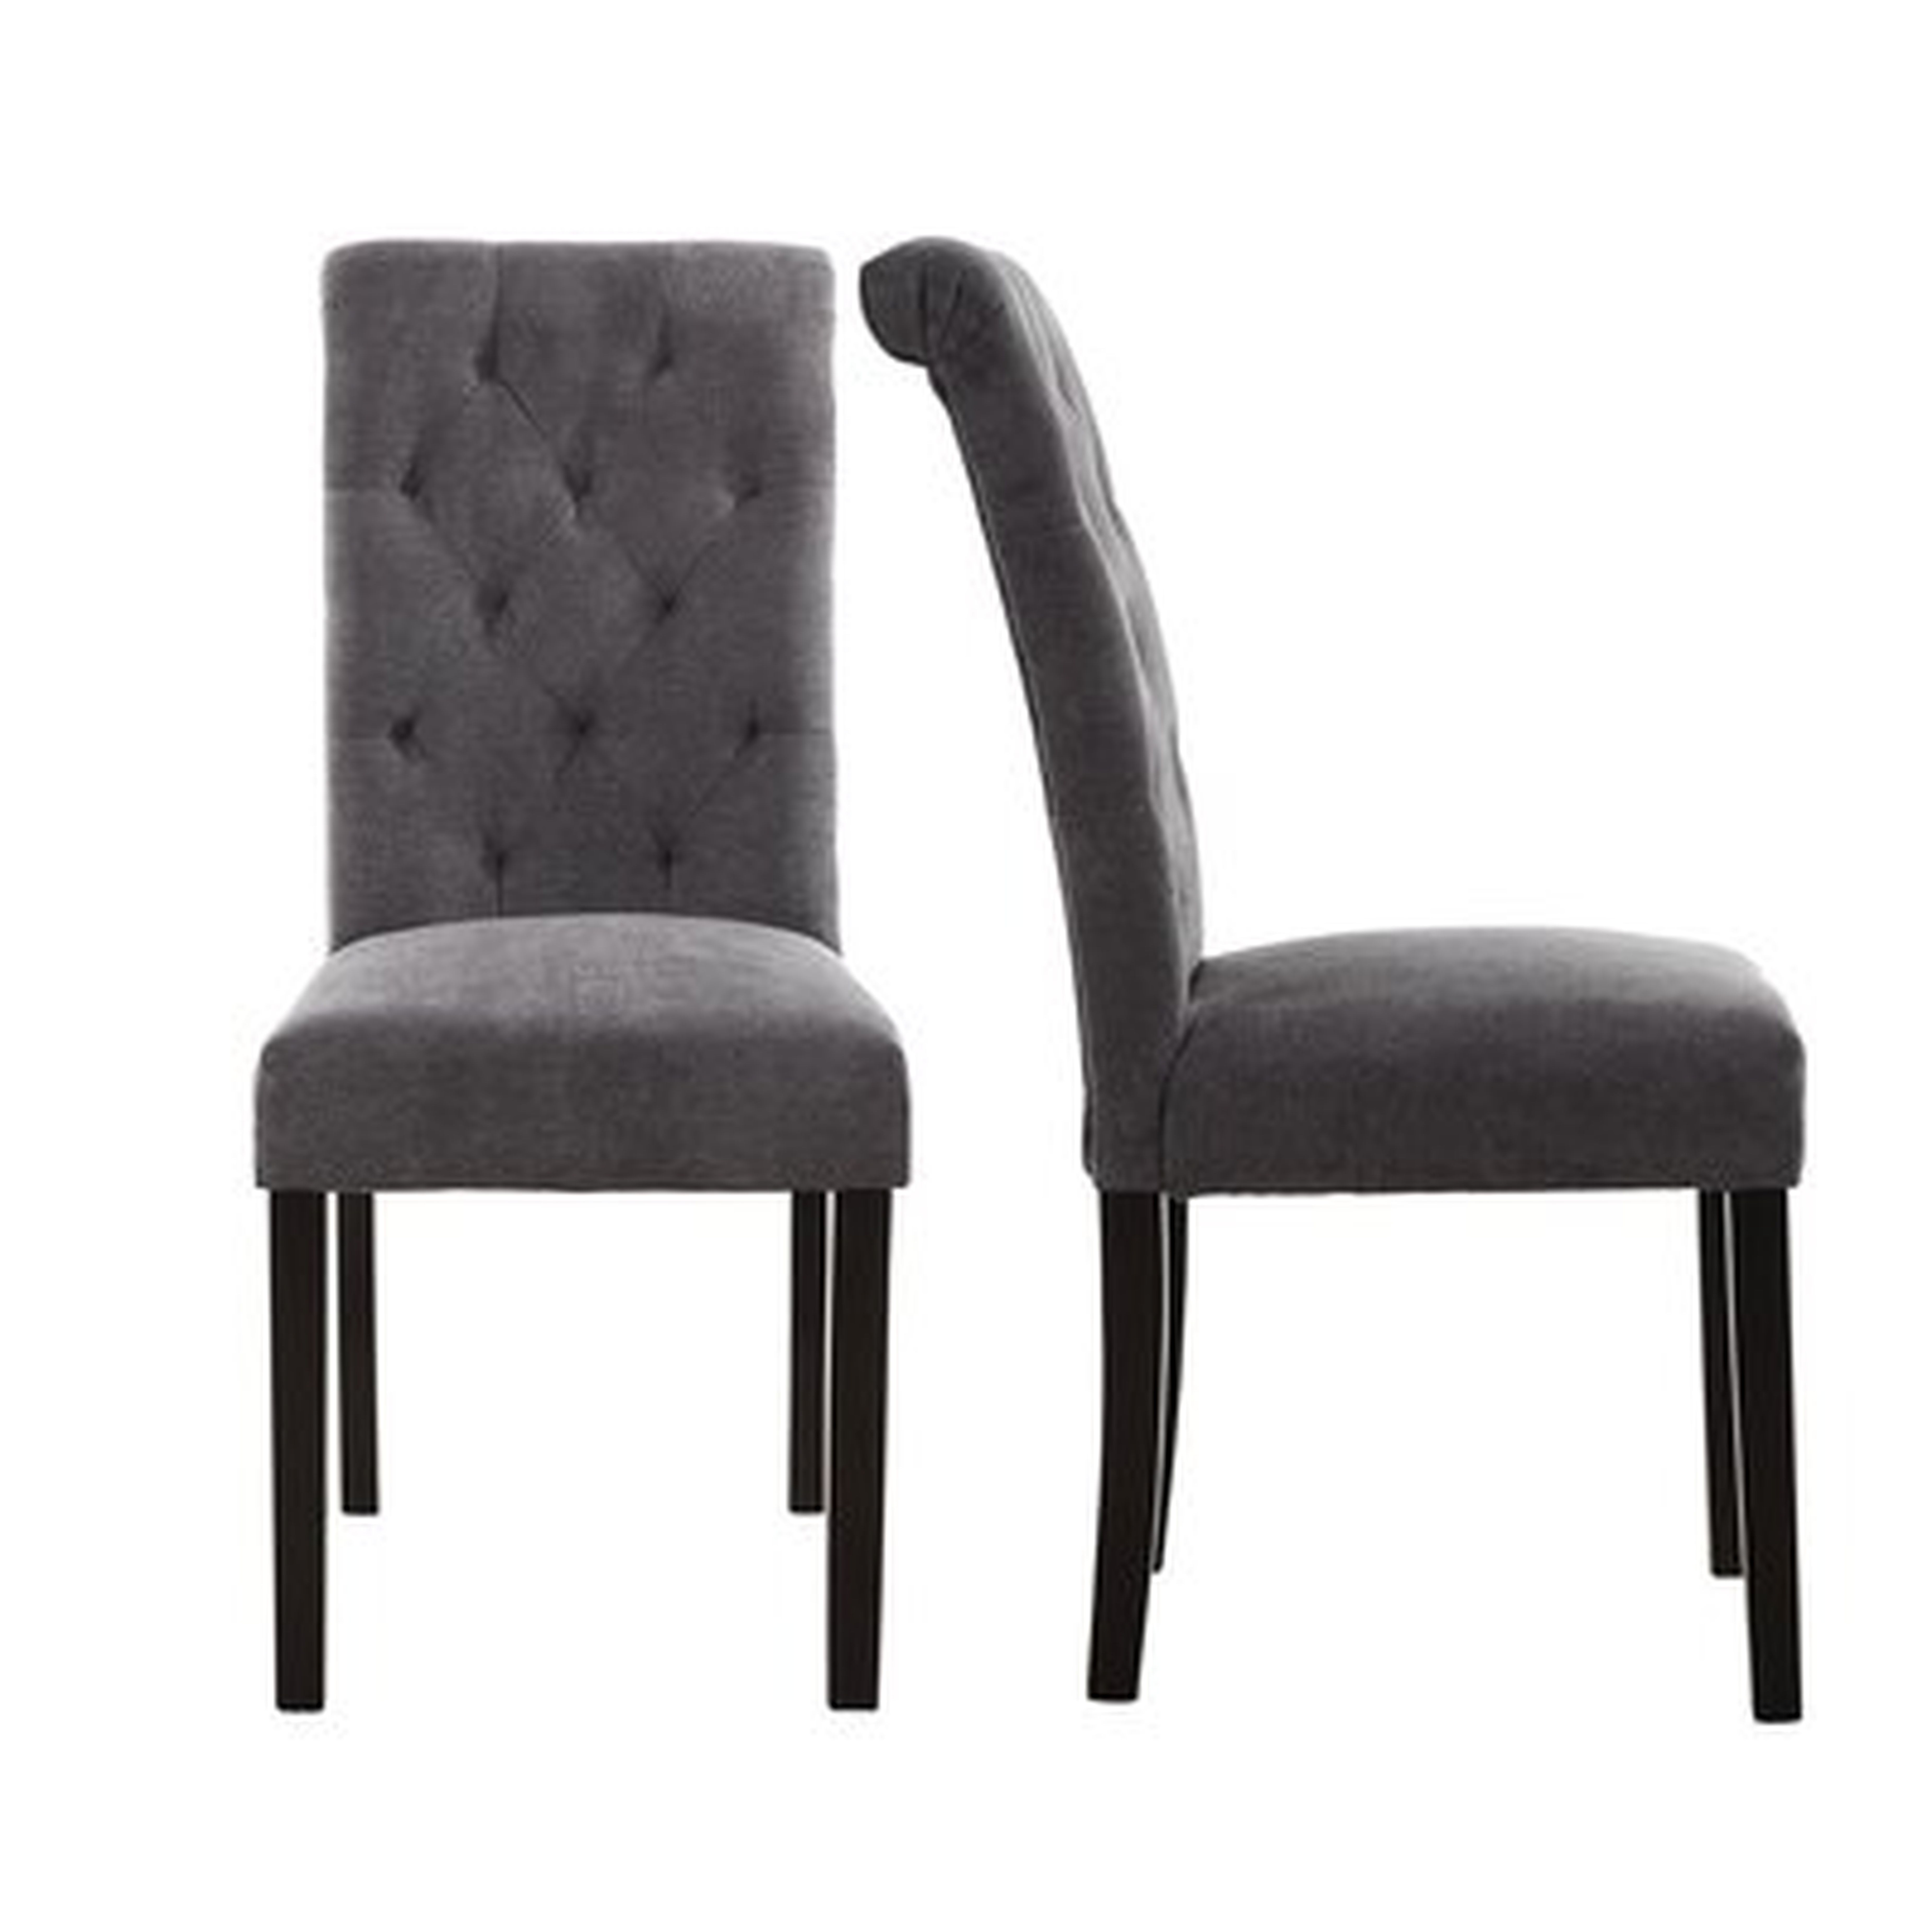 Barbagallo Tufted Upholstered Parsons Chair (Set of 2) - Wayfair